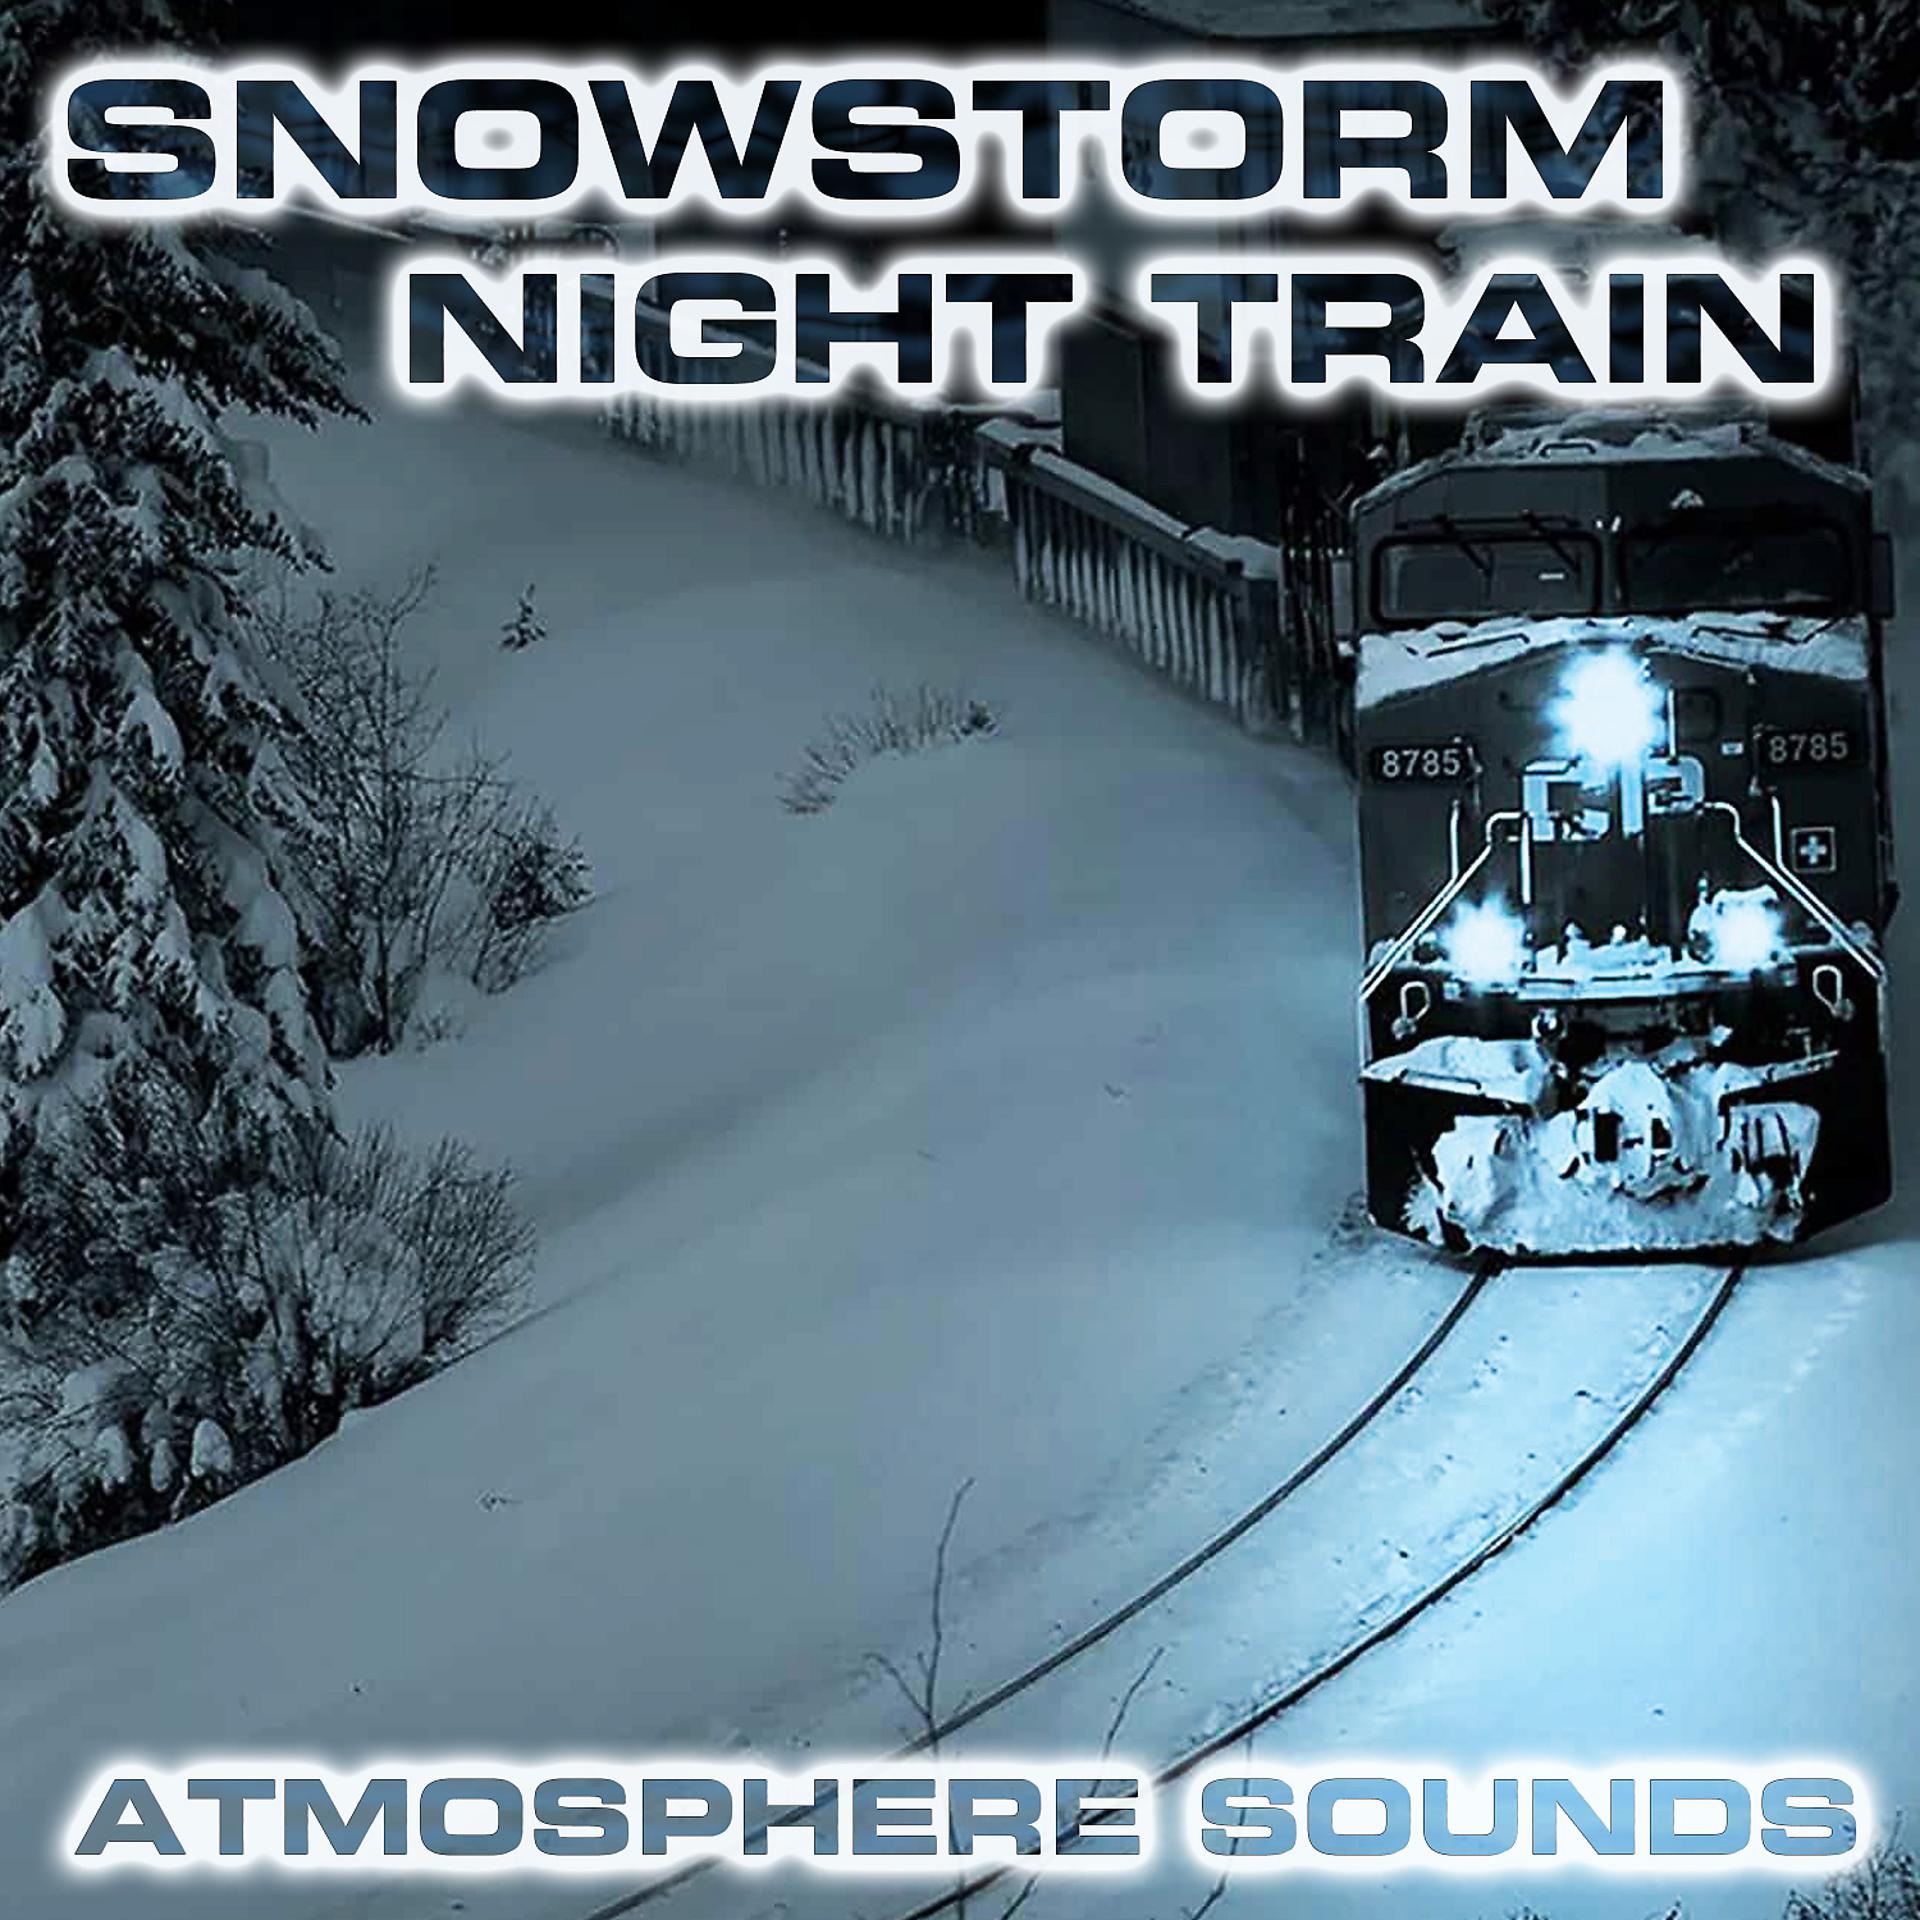 Постер альбома Snowstorm Night Train Atmosphere Sounds (feat. Nature Sounds FX, Atmospheres White Noise Sounds, Wind Atmosphere Sounds, Snowstorm Sounds, Blizzard White Noise Sound & Sleep Train Cabin Sound)